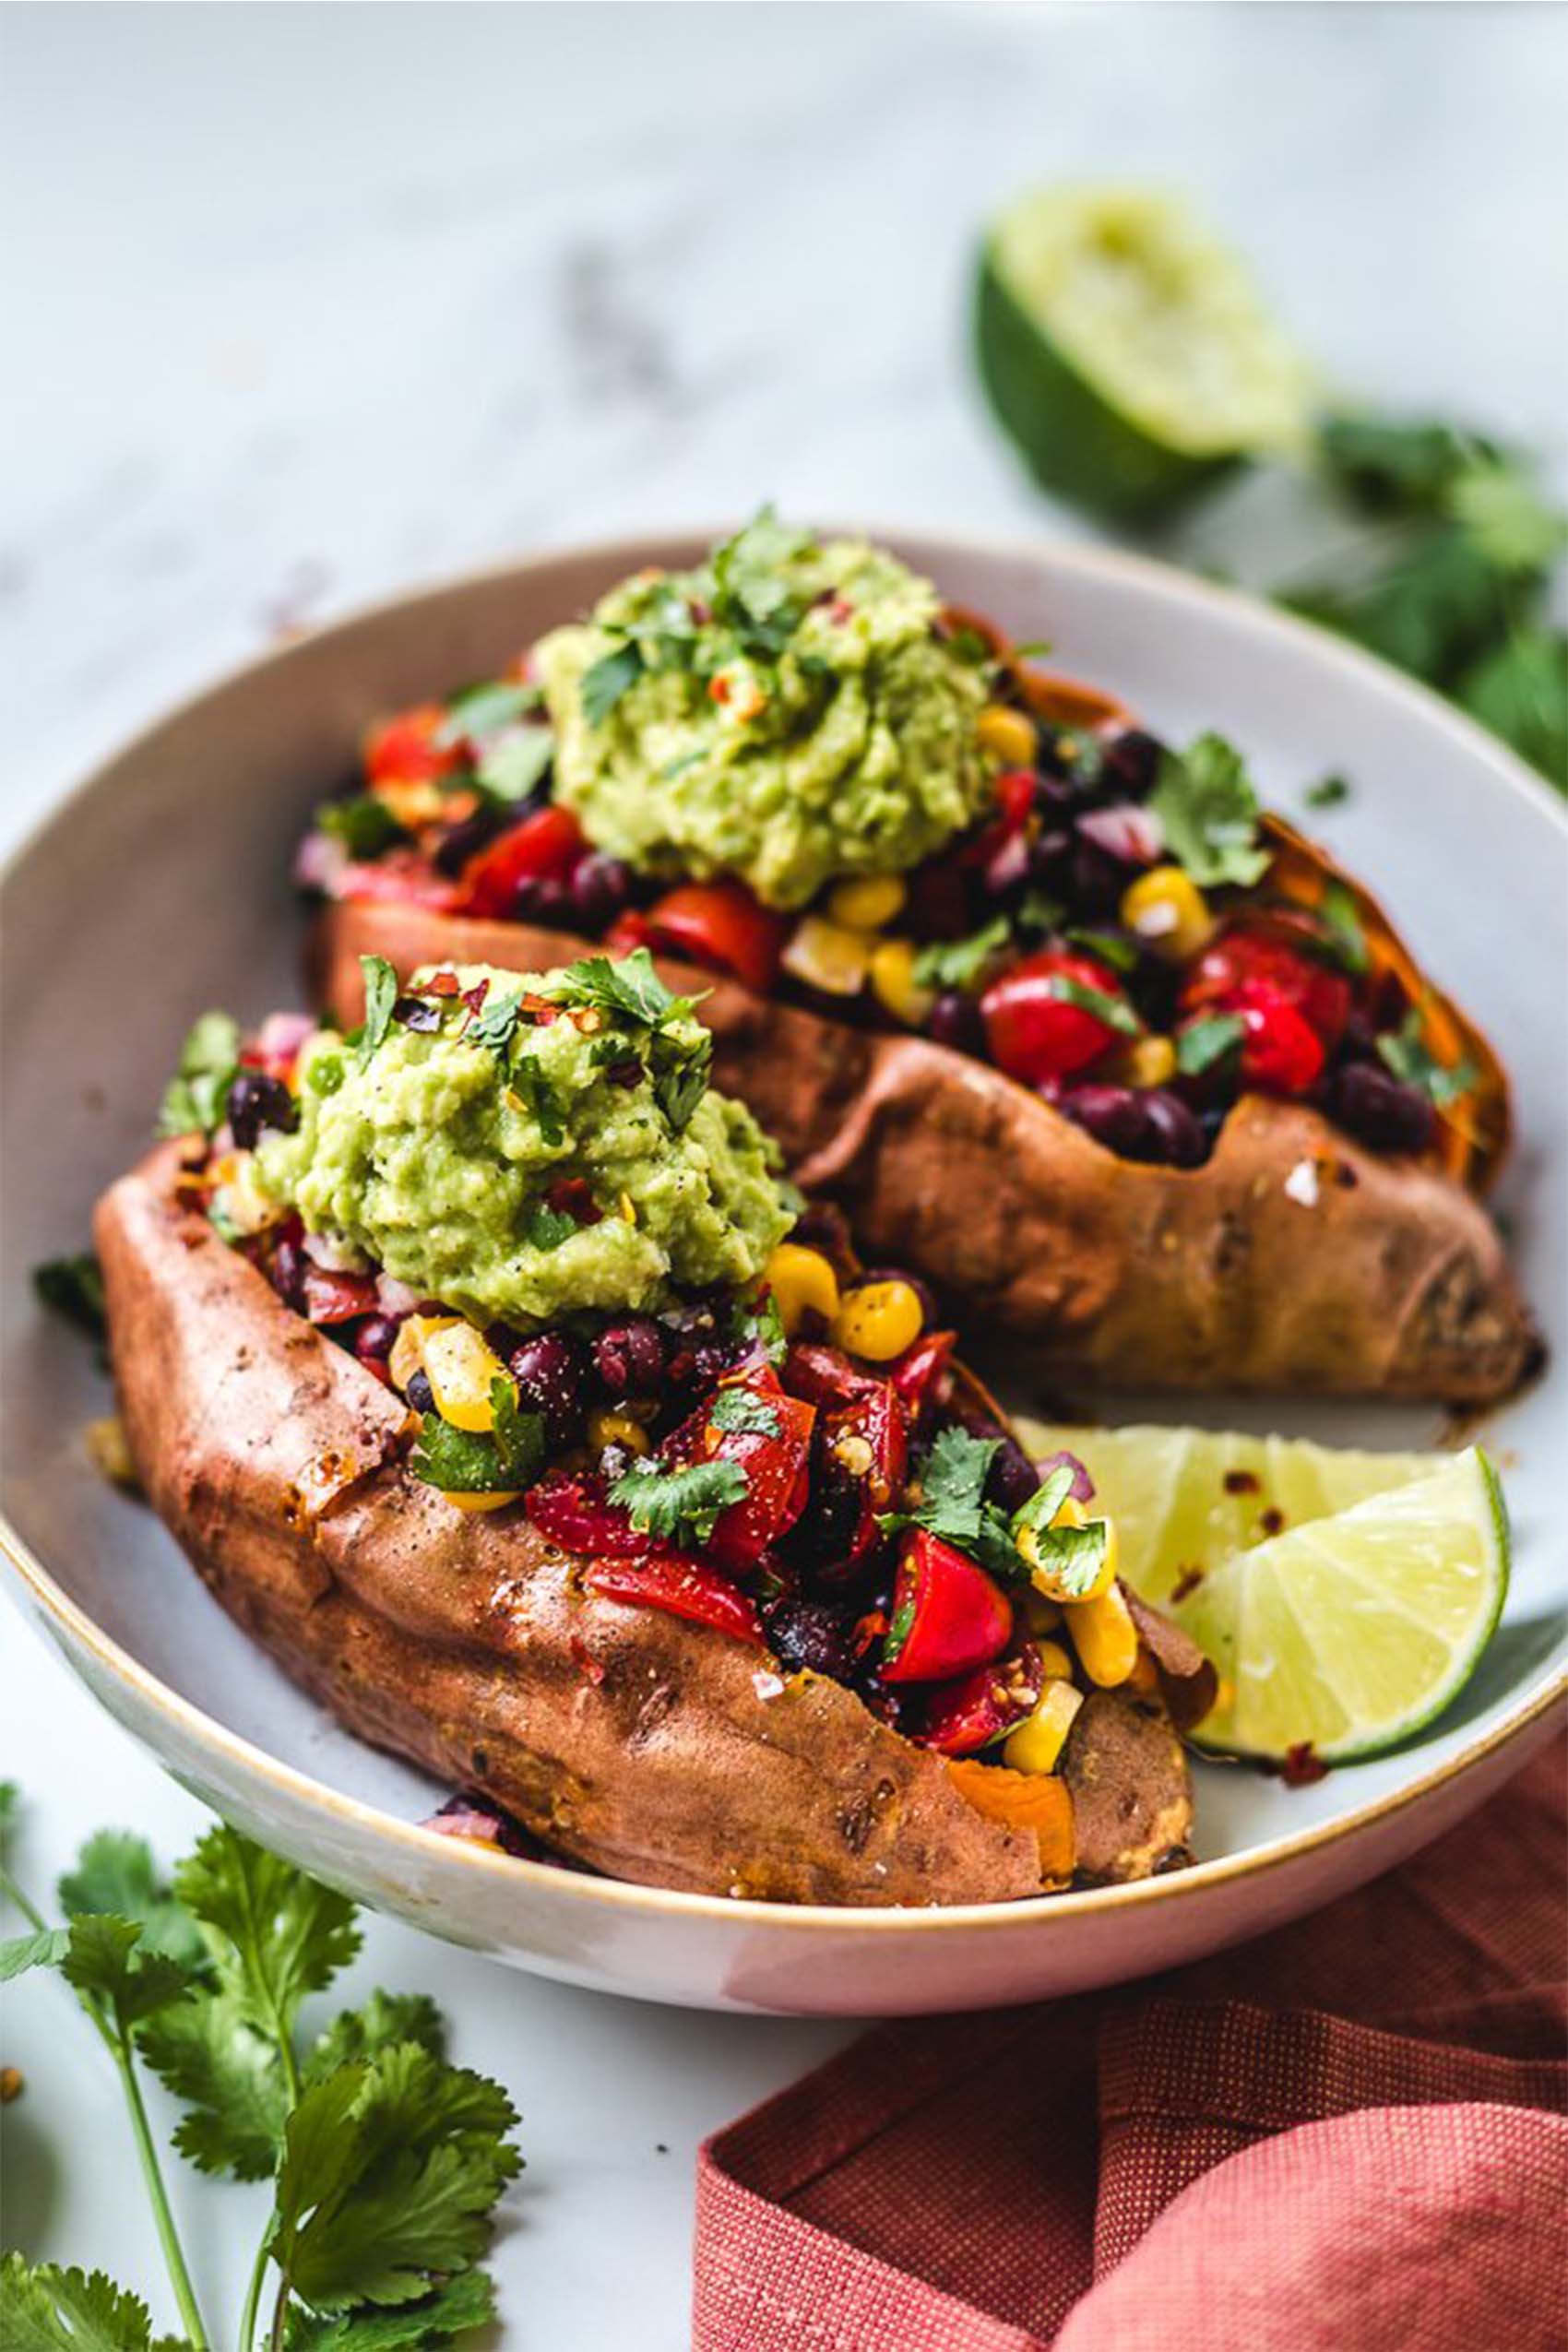 two sweet potatoes stuffed with black beans, veggies and topped with guacamole